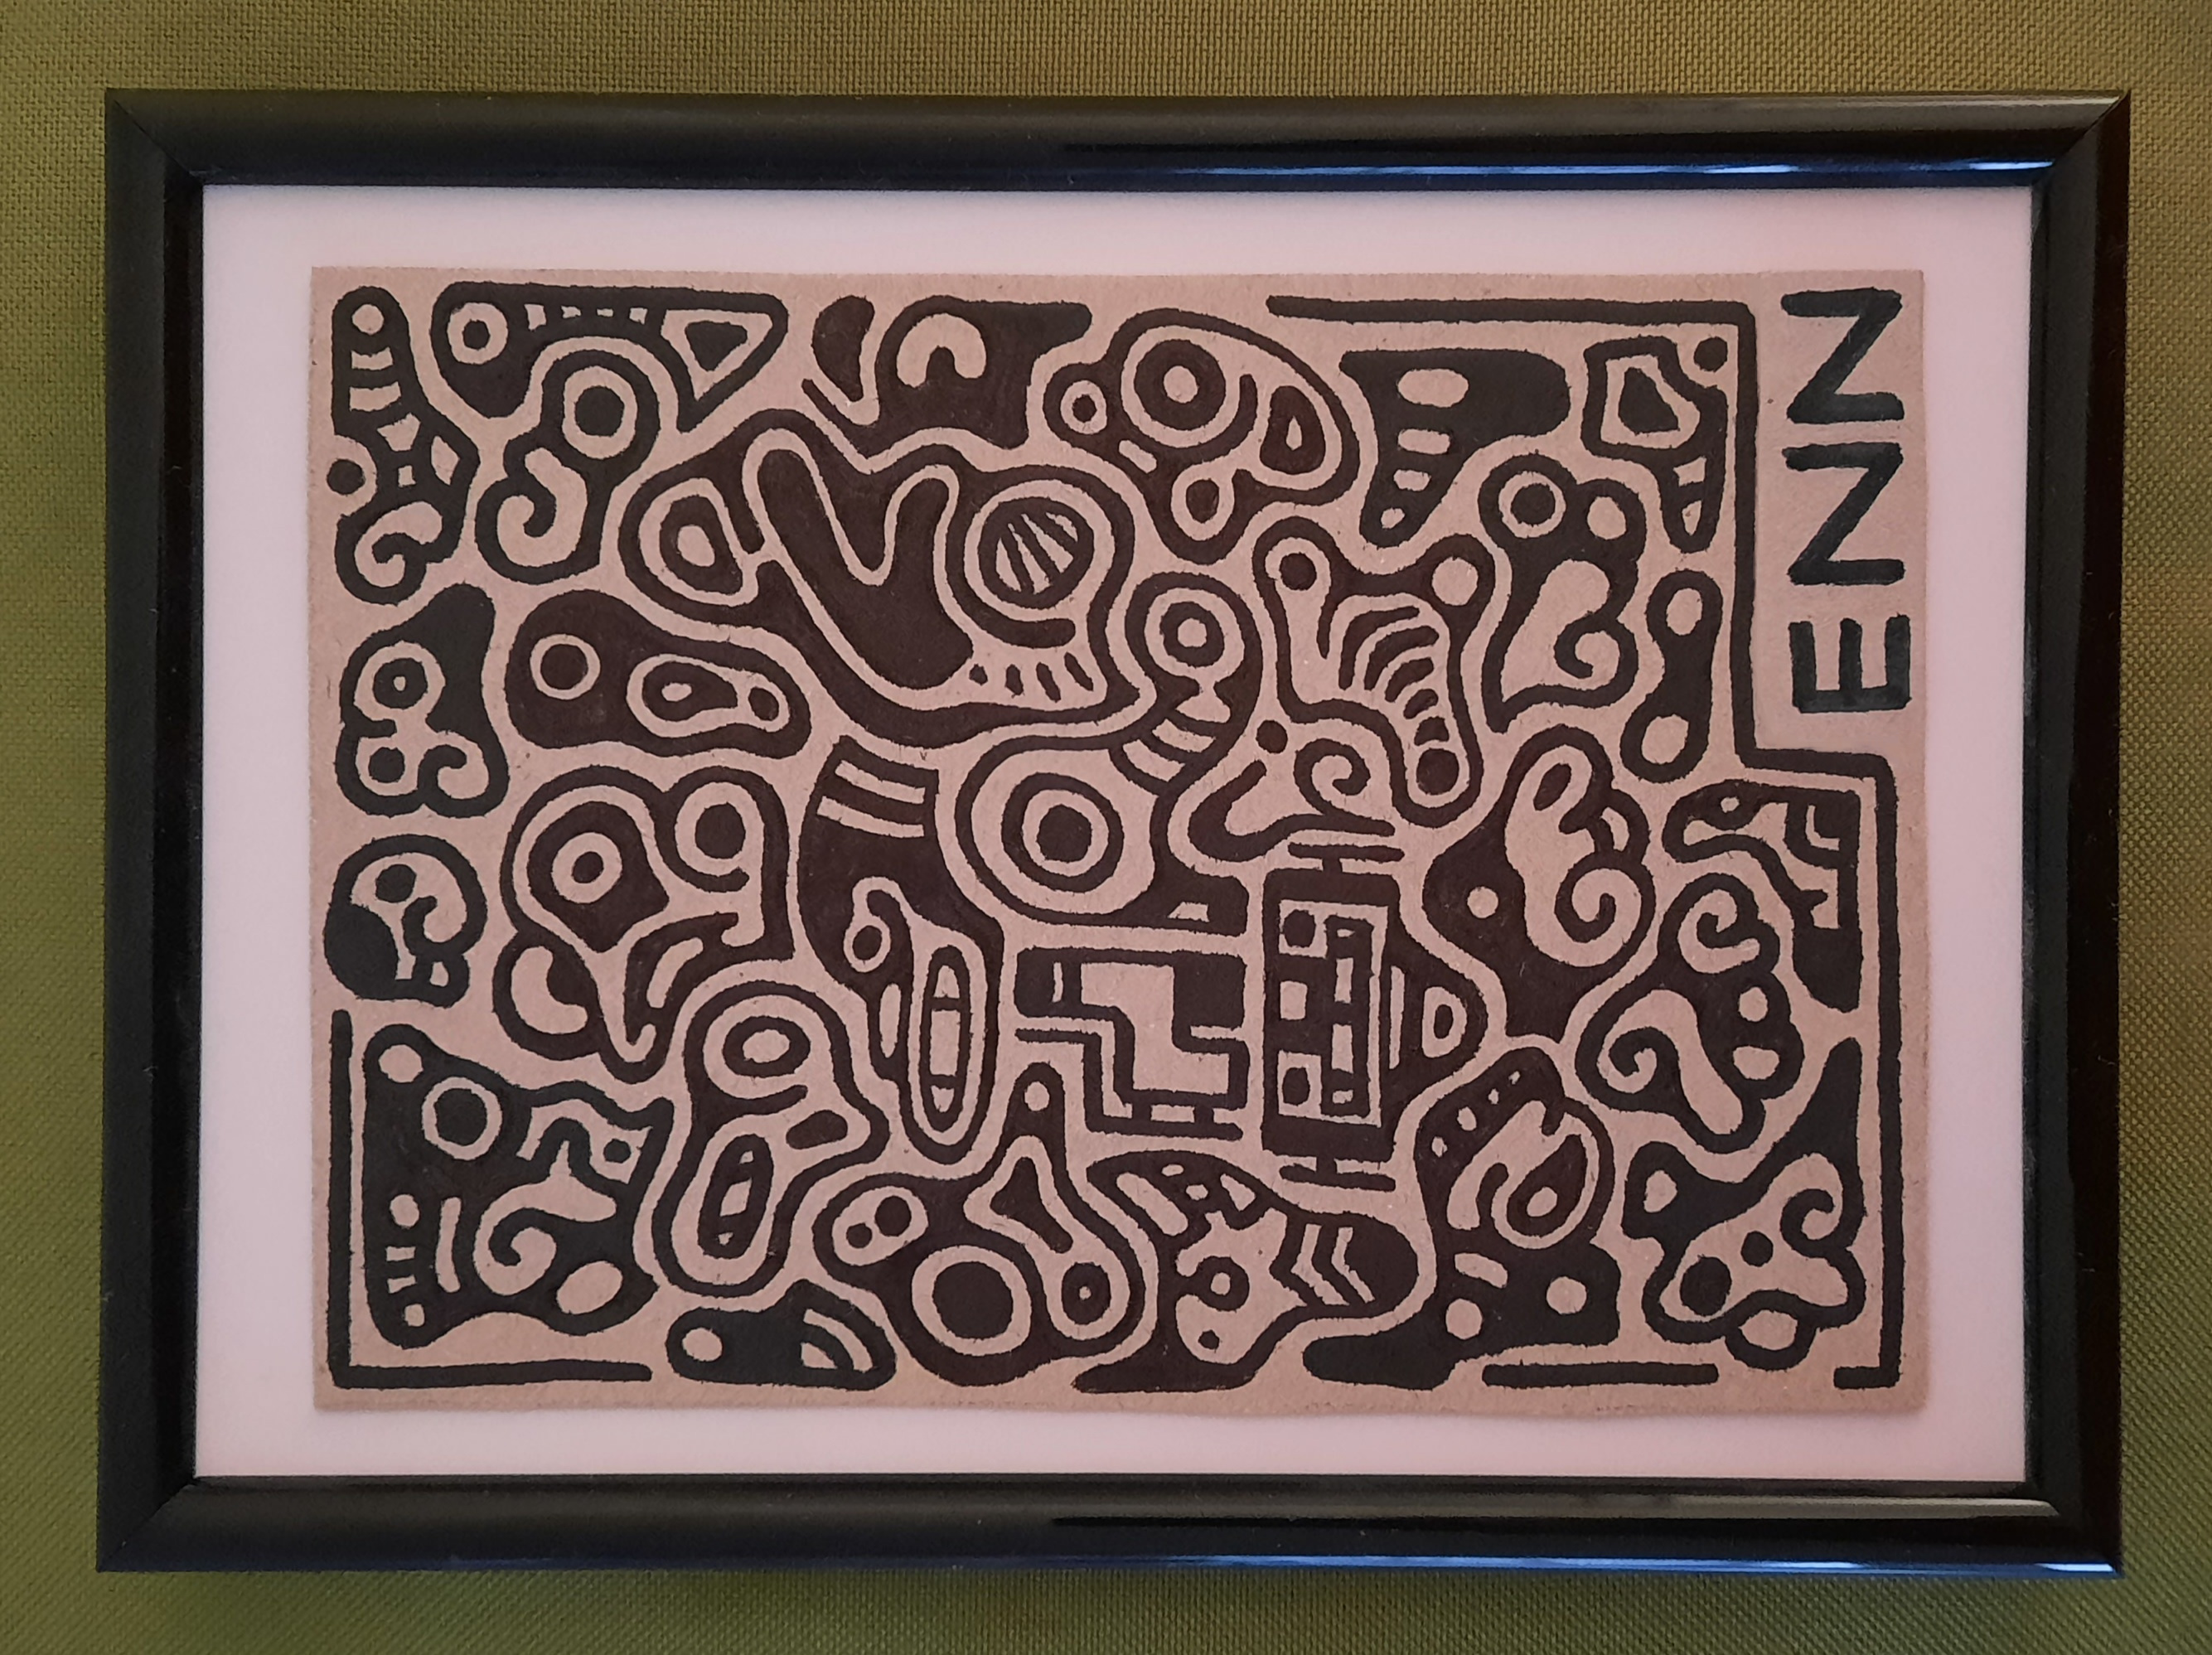 framed piece of cardboard covered in abstract doodles. it is signed ENN in the bottom corner.